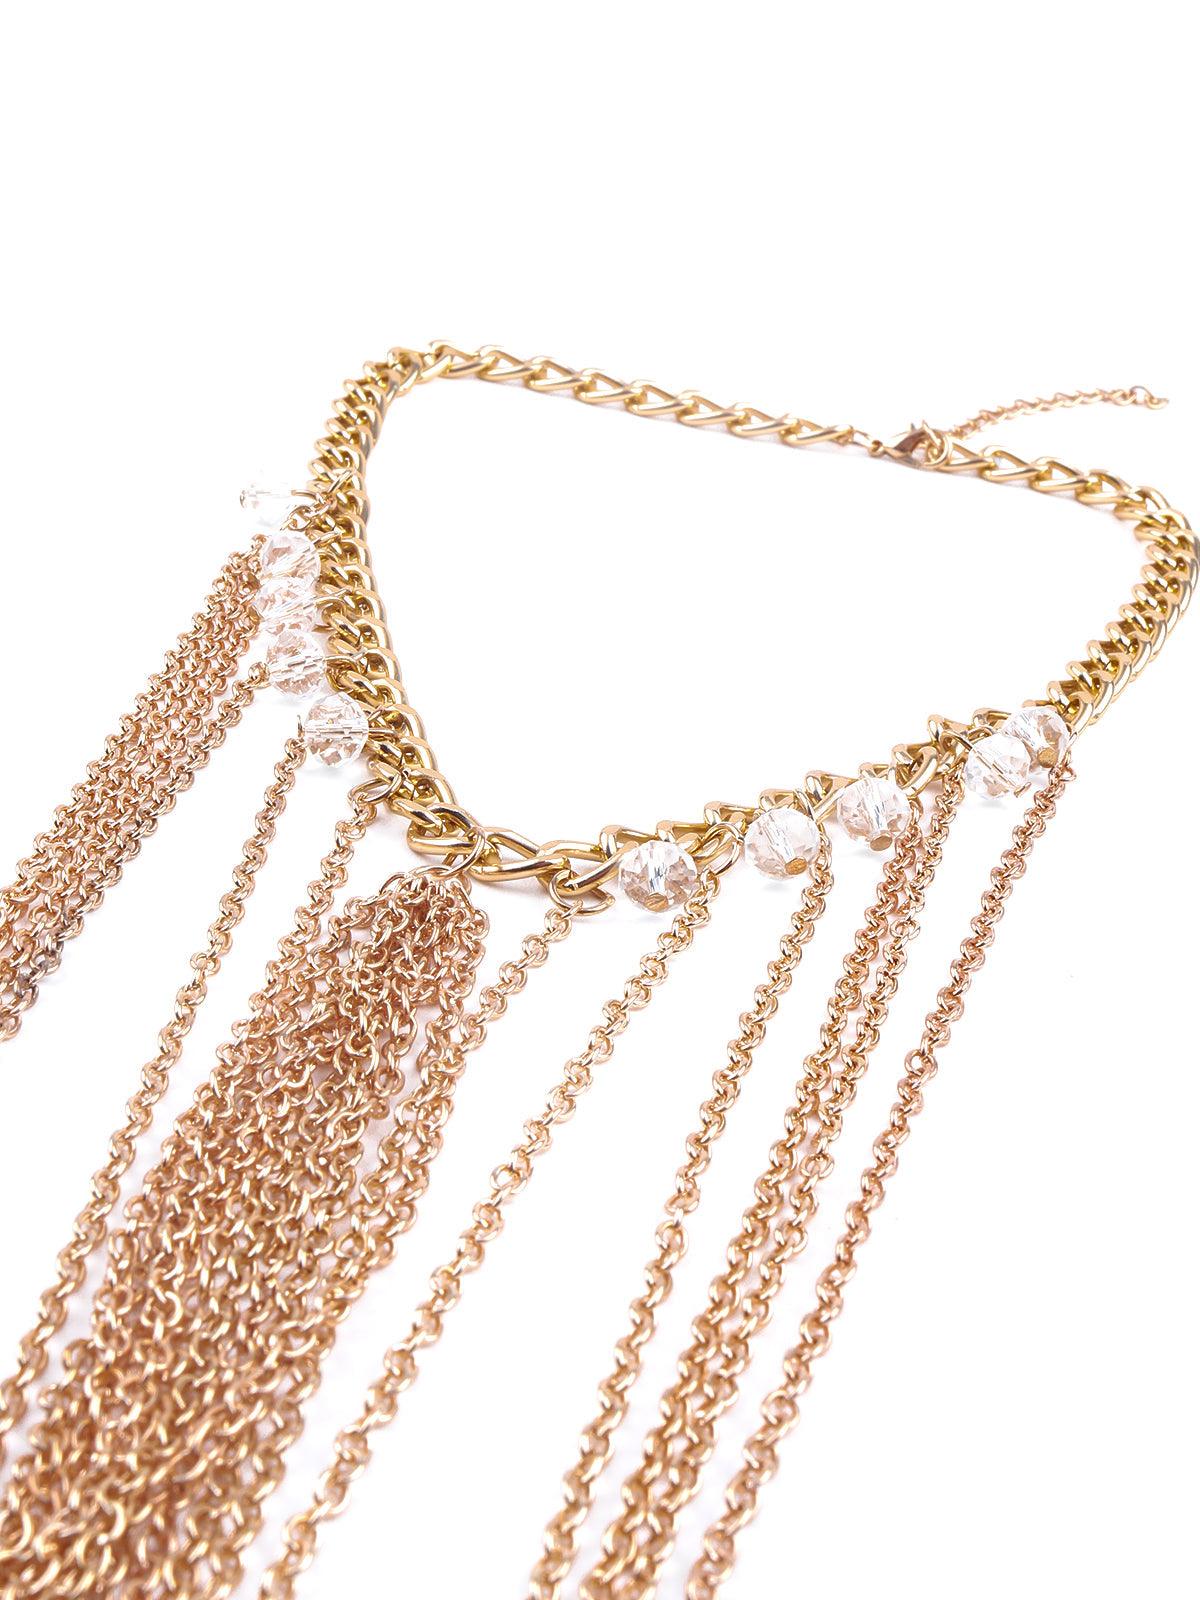 Women's Awesome Gold-Tone Exclusive Body Chain For Women - Odette